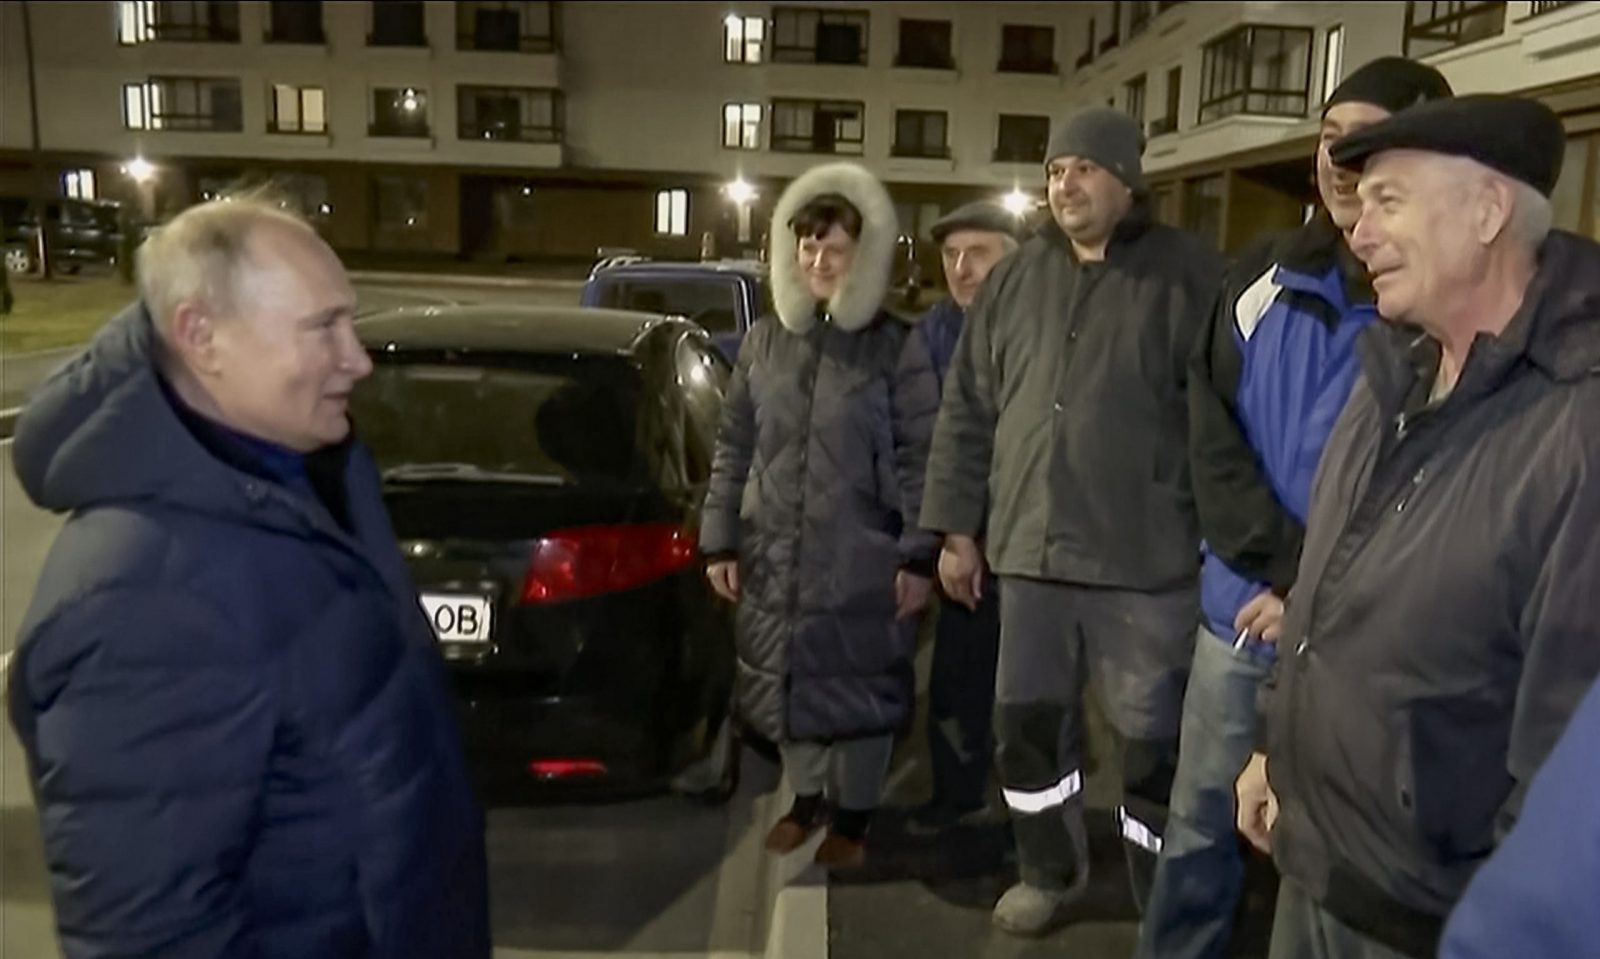 epa10532079 A still image taken from a handout video provided by the Russian President's press service on 19 March 2023 shows Russian President Vladimir Putin (L) speaks with locals during his visit to Mariupol, eastern Ukraine, late 18 March 2023. Putin visited the Russian-occupied city after he visited Crimea on the ninth anniversary of Russia's annexation of the Black Sea peninsula. According to the Kremlin, Putin had conversations with local residents, visited an apartment of one of the locals, assessed new roads, and followed the construction of new facilities in the city. On 24 February 2022 Russian troops entered the Ukrainian territory in what the Russian president declared to be a 'Special Military Operation', starting an armed conflict that has provoked destruction and a humanitarian crisis.  EPA/RUSSIAN PRESIDENT PRESS SERVICE/HANDOUT HANDOUT BEST QUALITY AVAILABLE HANDOUT EDITORIAL USE ONLY/NO SALES